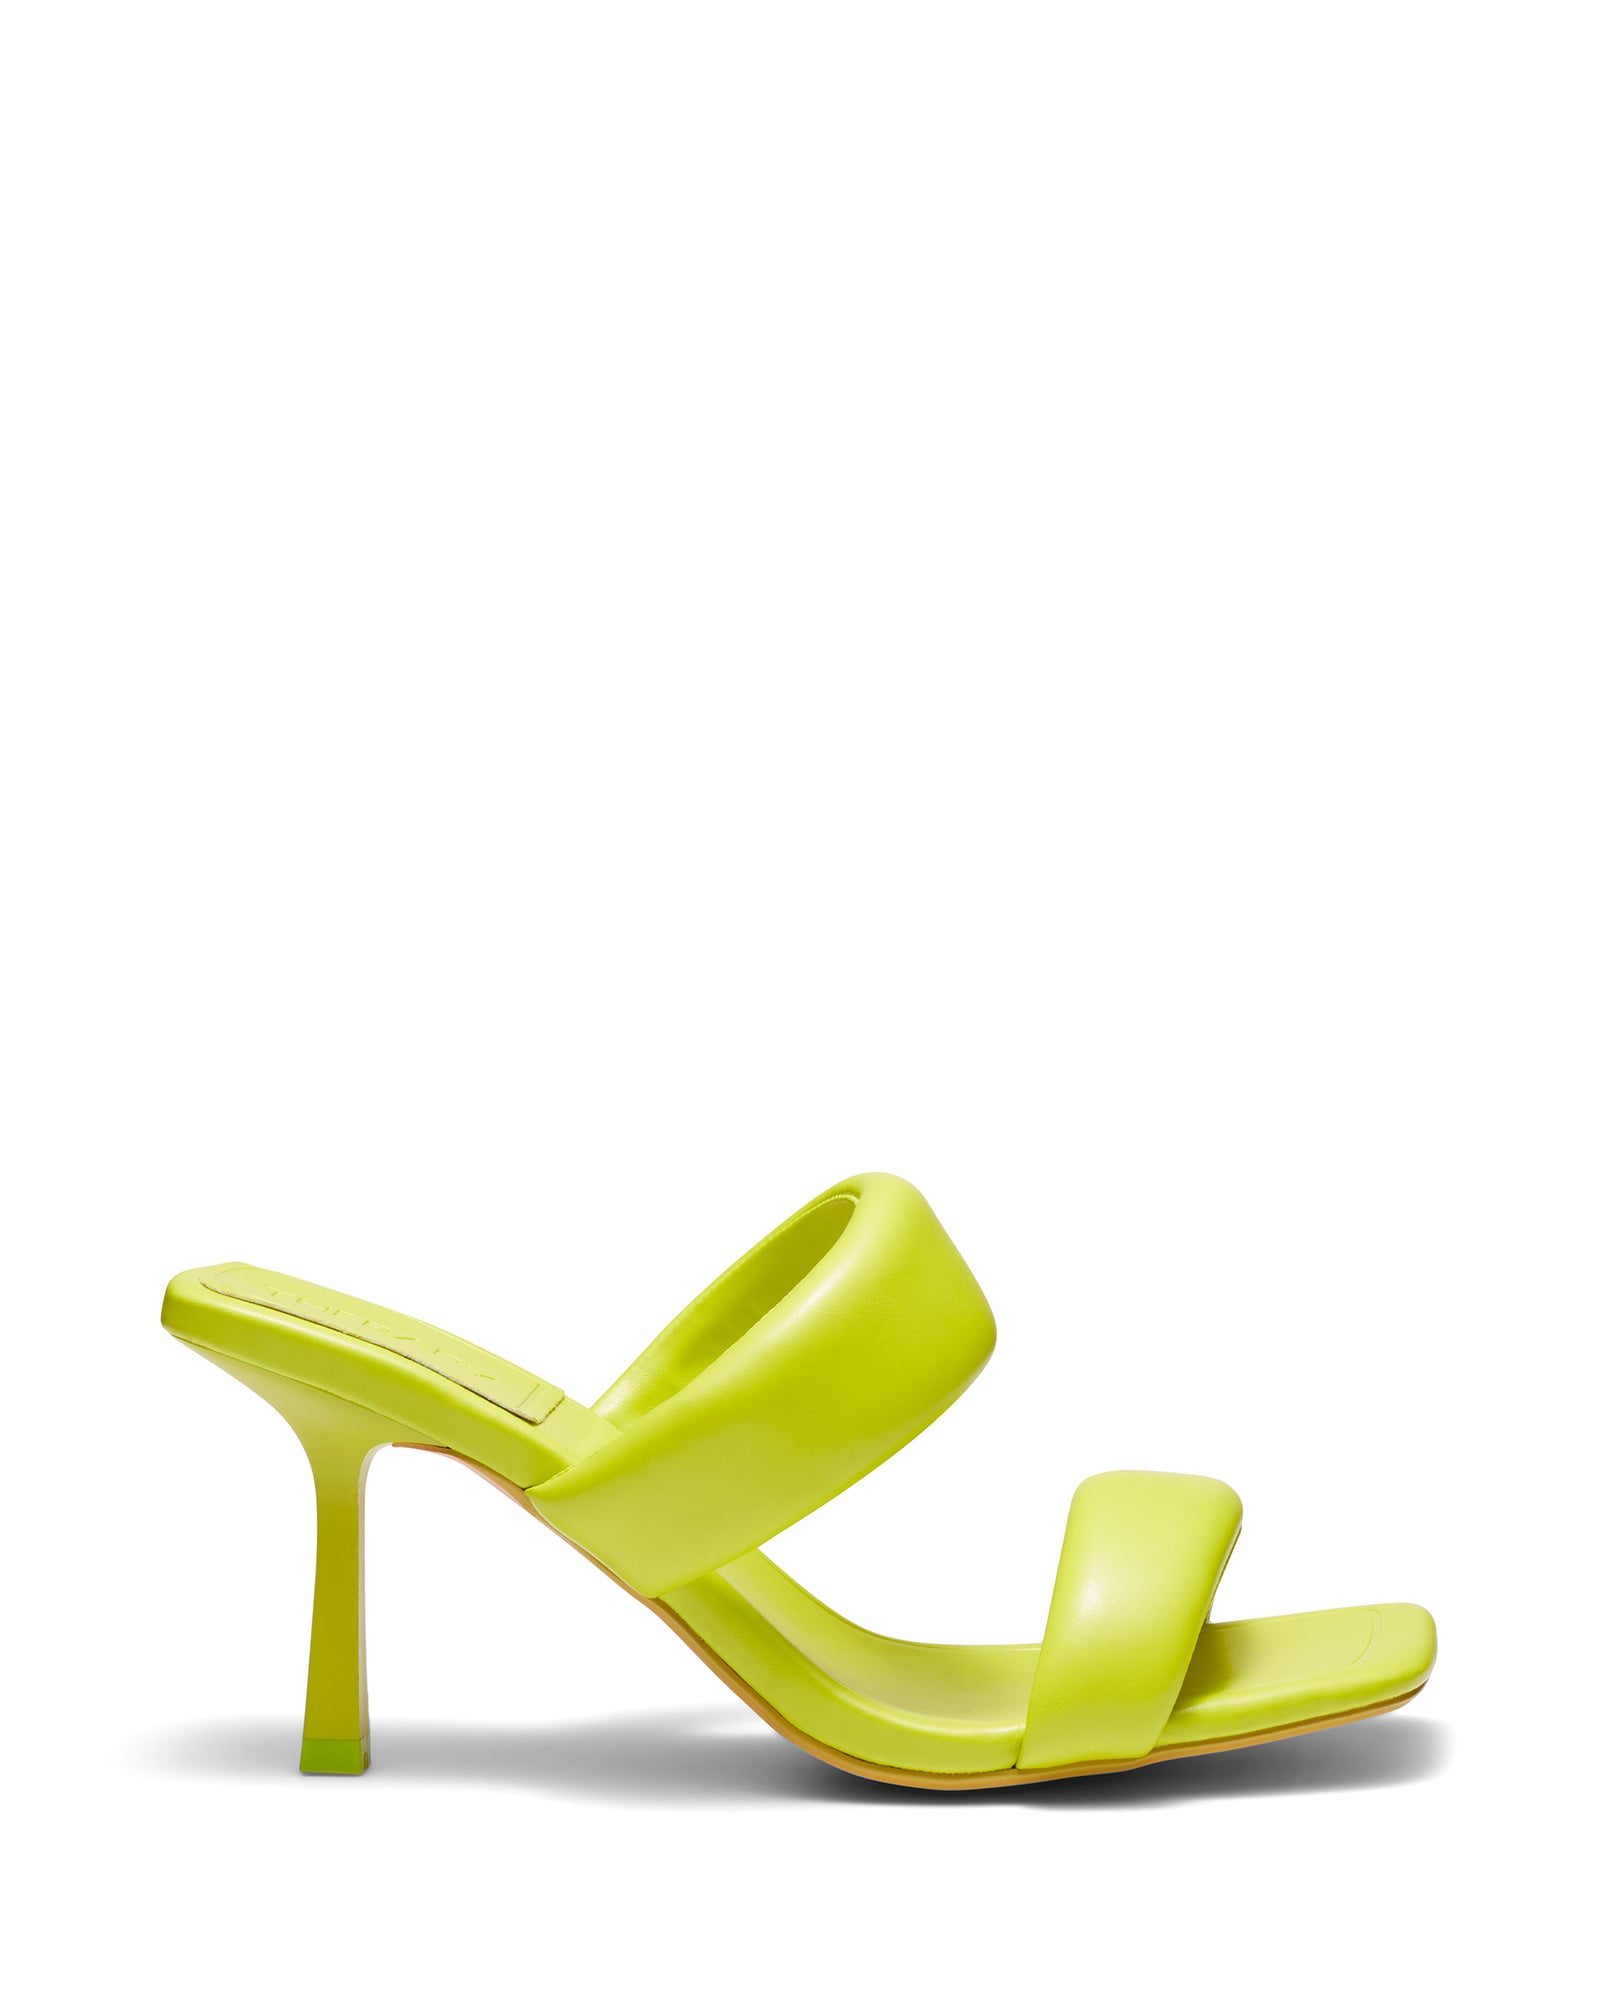 Therapy Shoes Dolla Citrus | Women's Heels | Sandals | Stiletto | Puffy